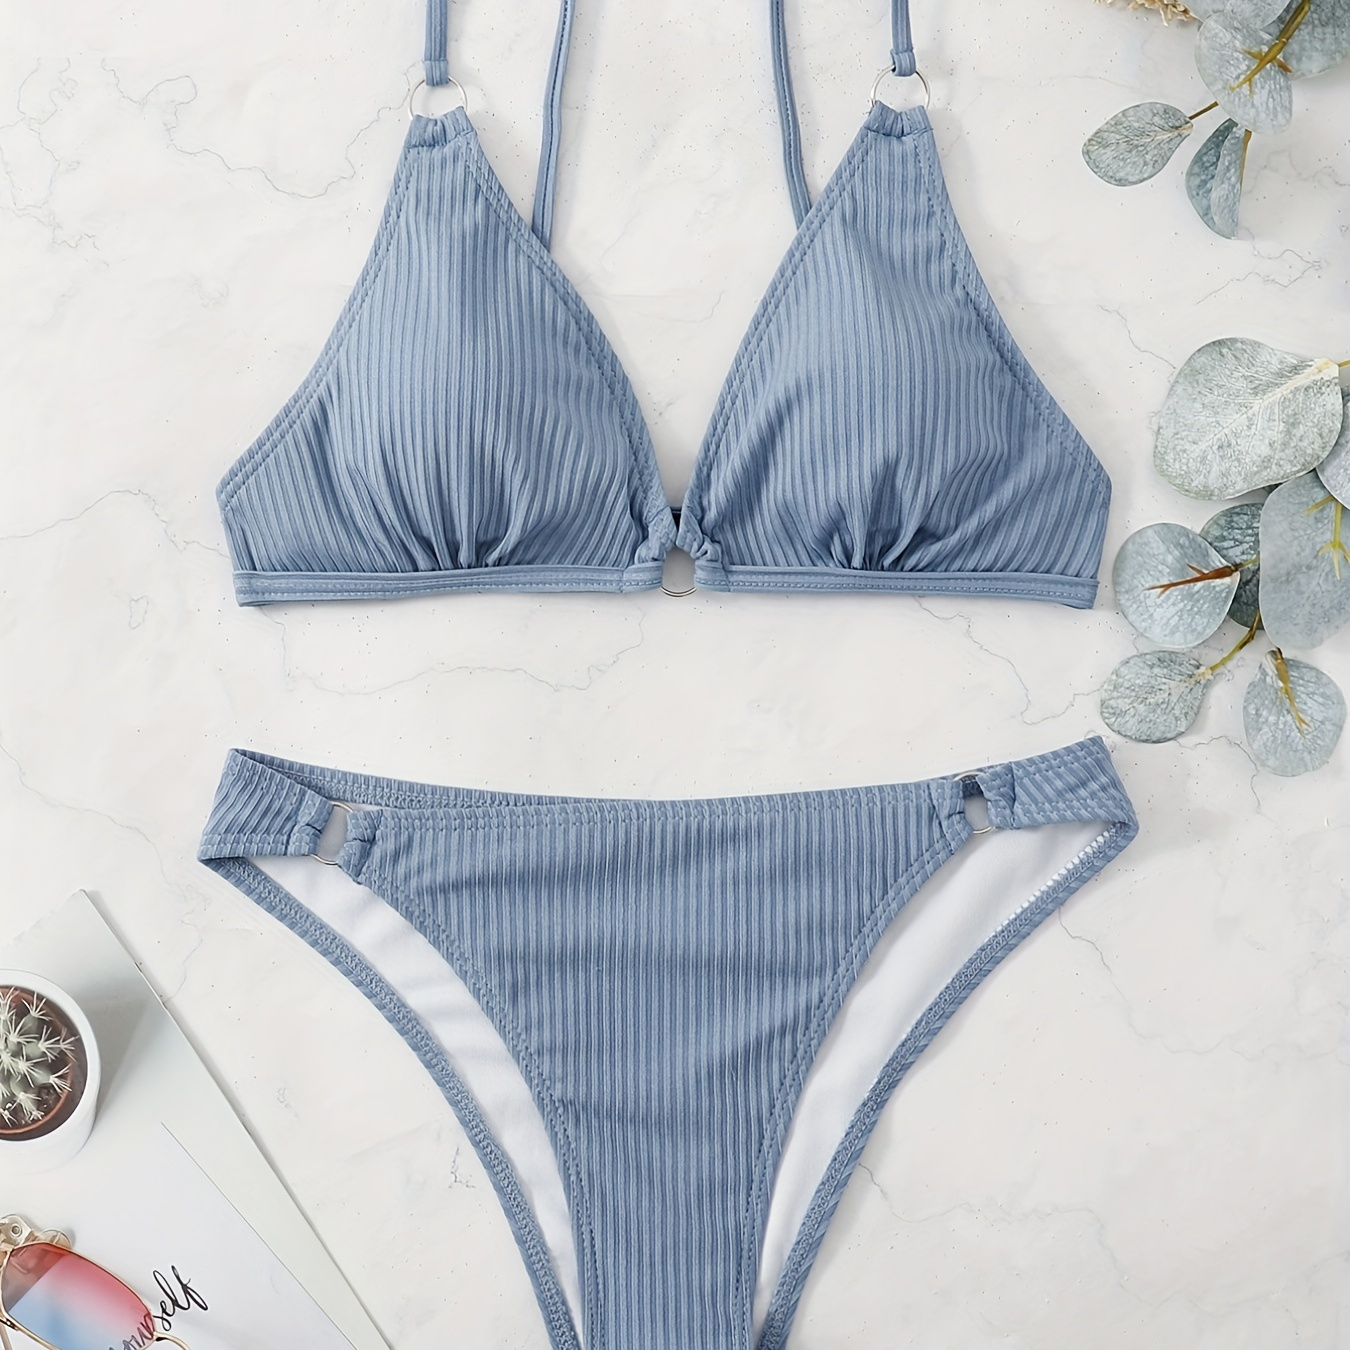 

Grey Rib-knit Bikini Sets, V Neck Ring-linked Tie Back Backless High Cut 2 Pieces Swimsuit, Women's Swimwear & Clothing Triangle Top